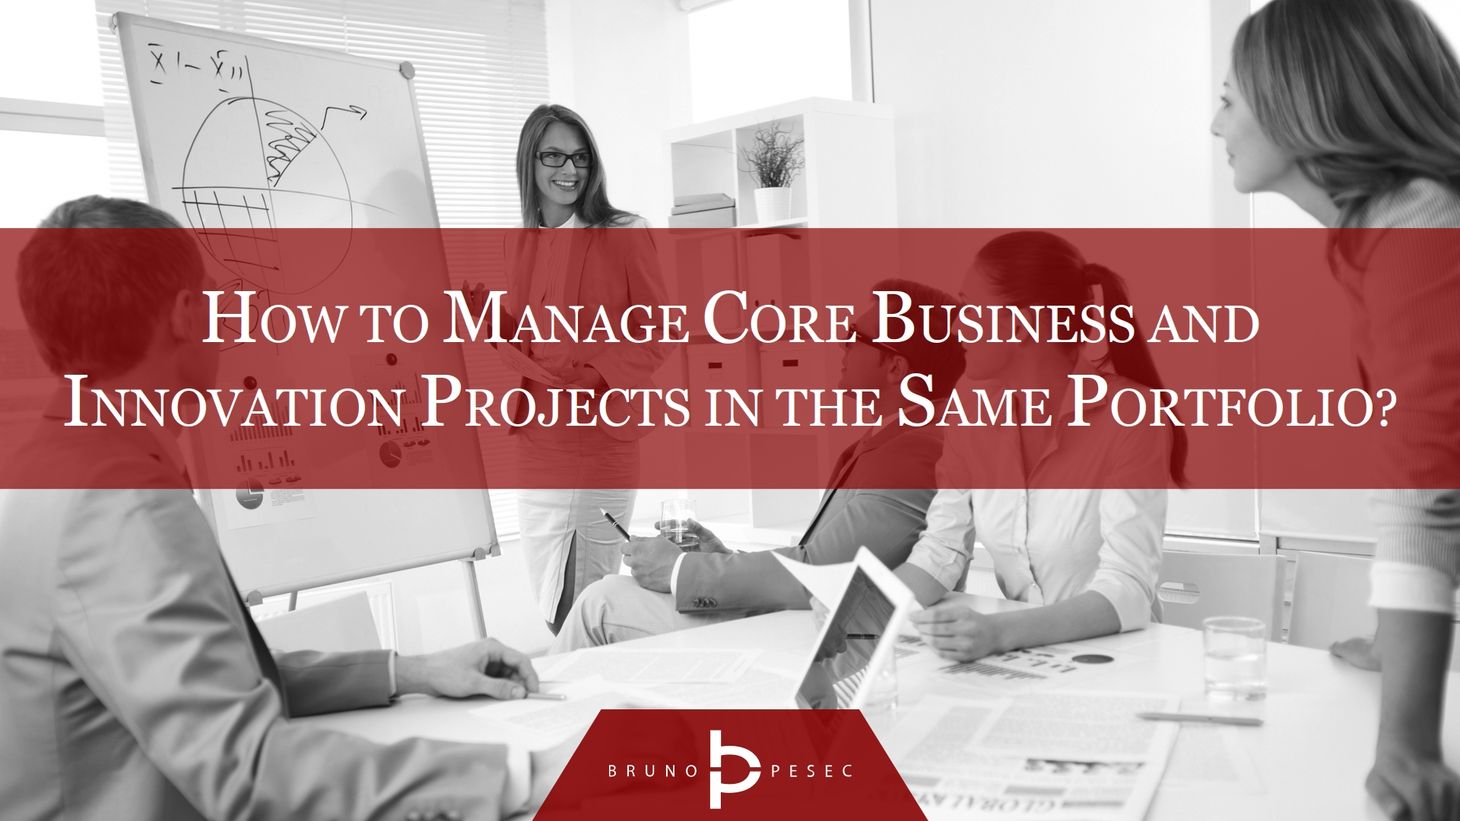 How to manage core business and innovation projects in the same portfolio?